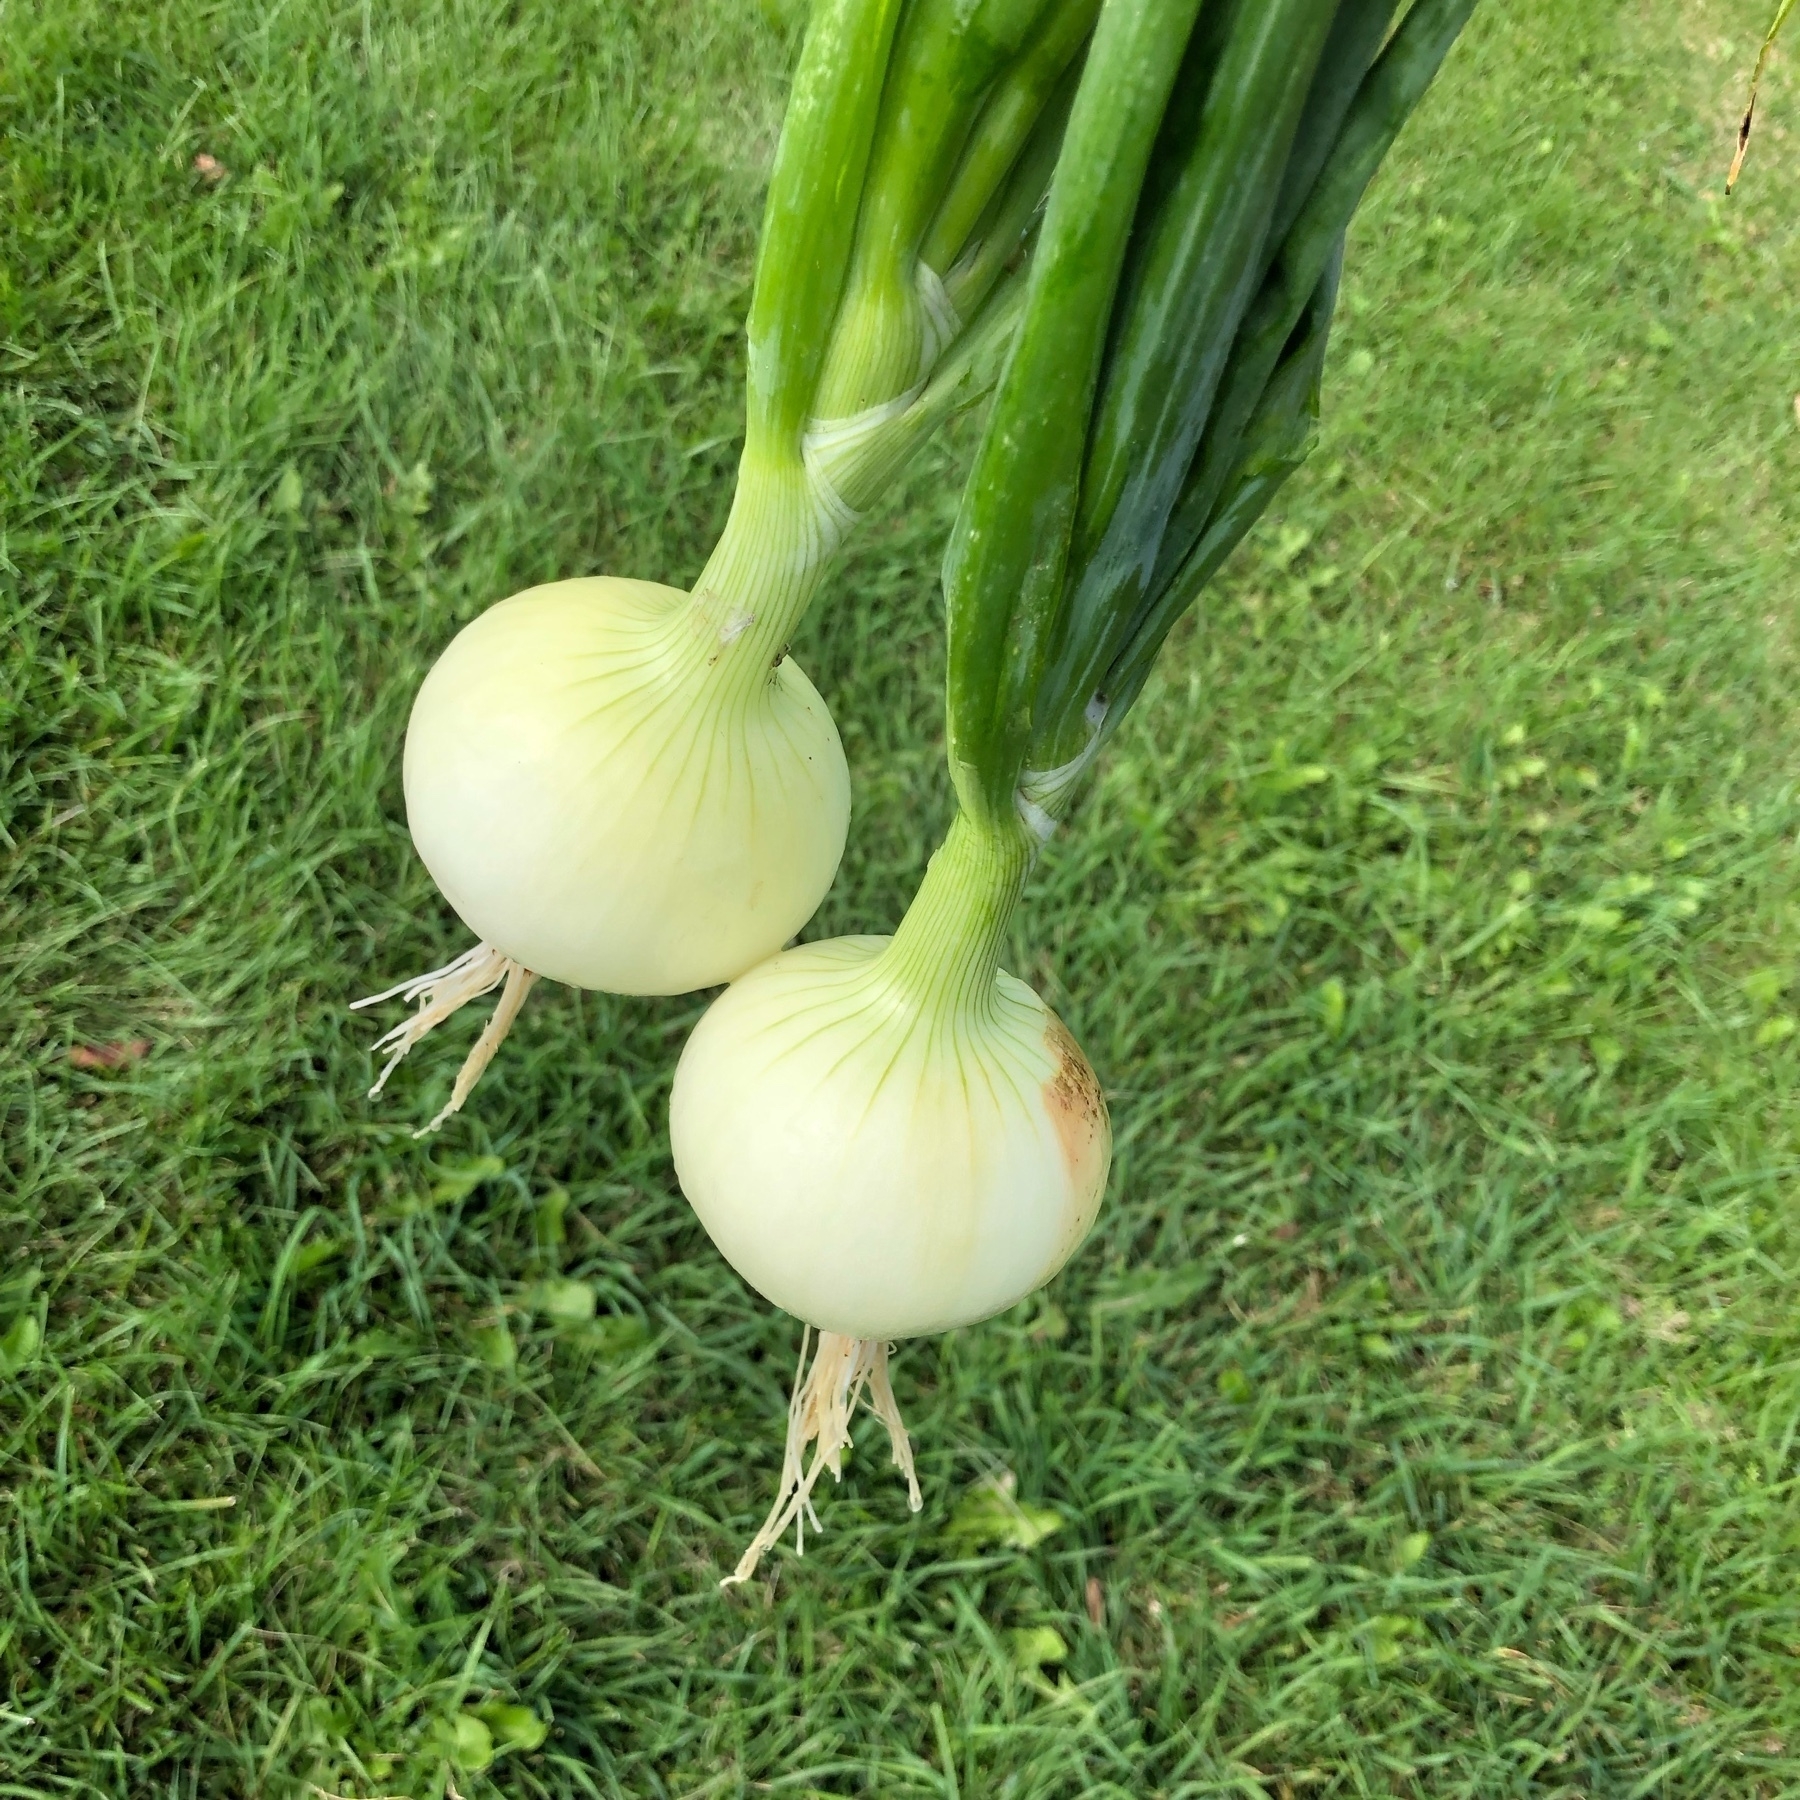 2 large onions and stalks over grass